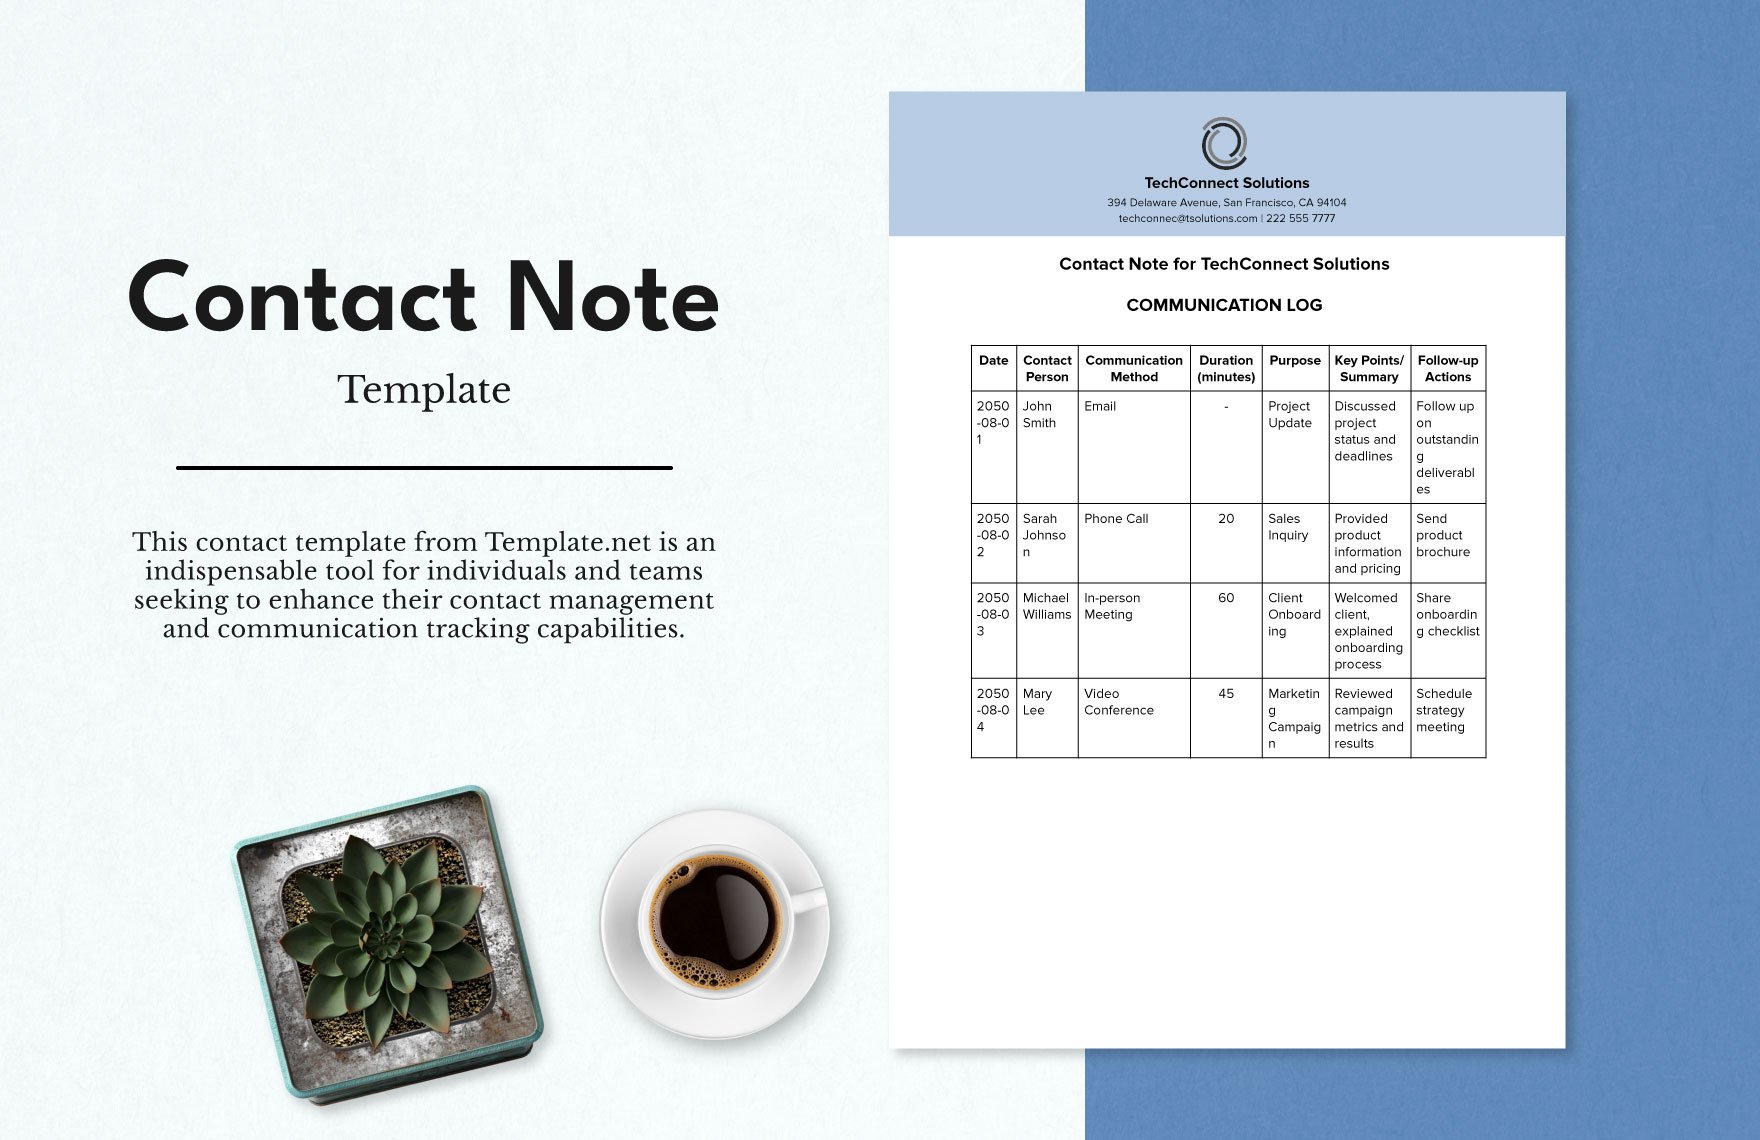 Contact Note Template